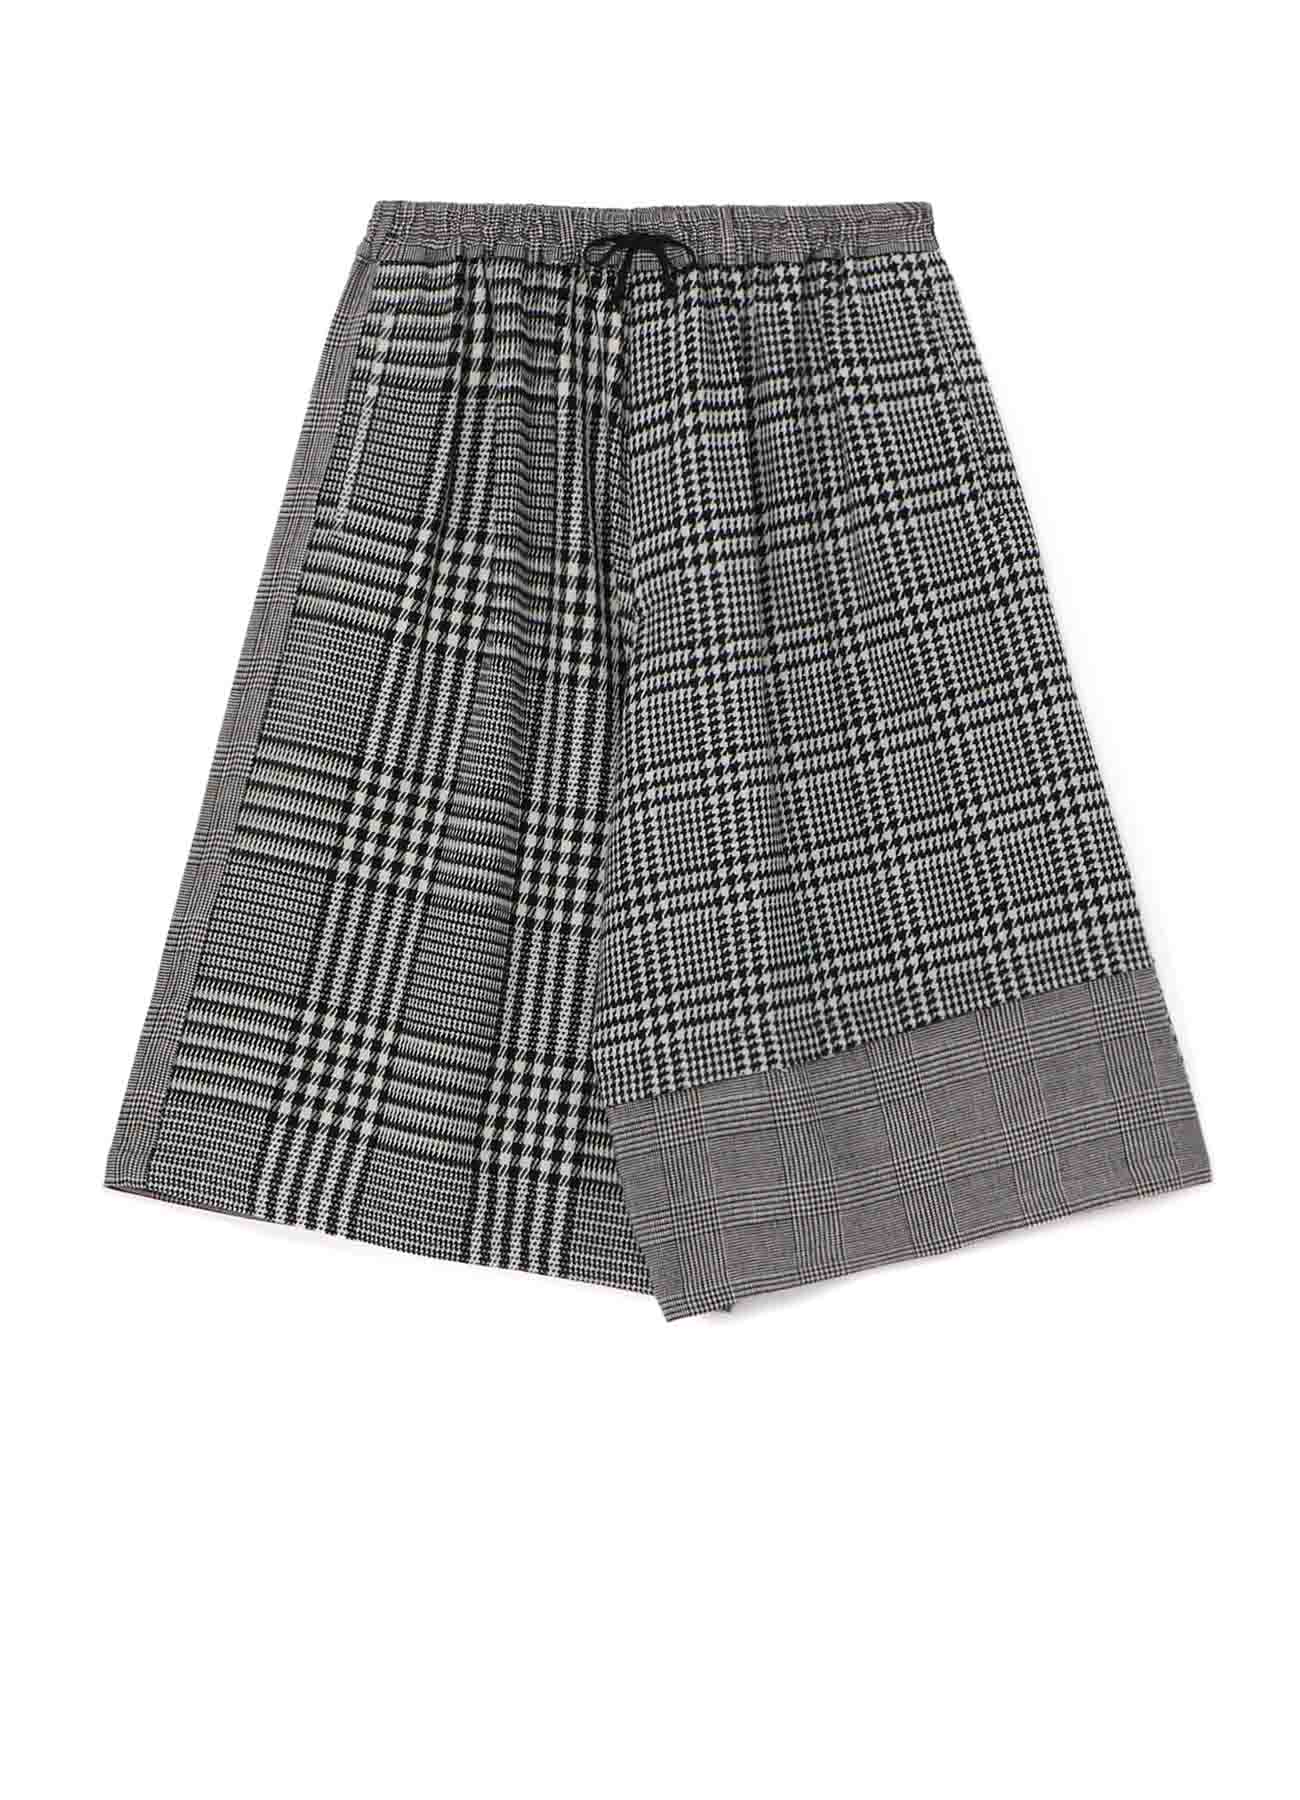 CRAZY CHECK MULTI-MATERIAL SWITCHING 7/10 LENGTH STRING PANTS